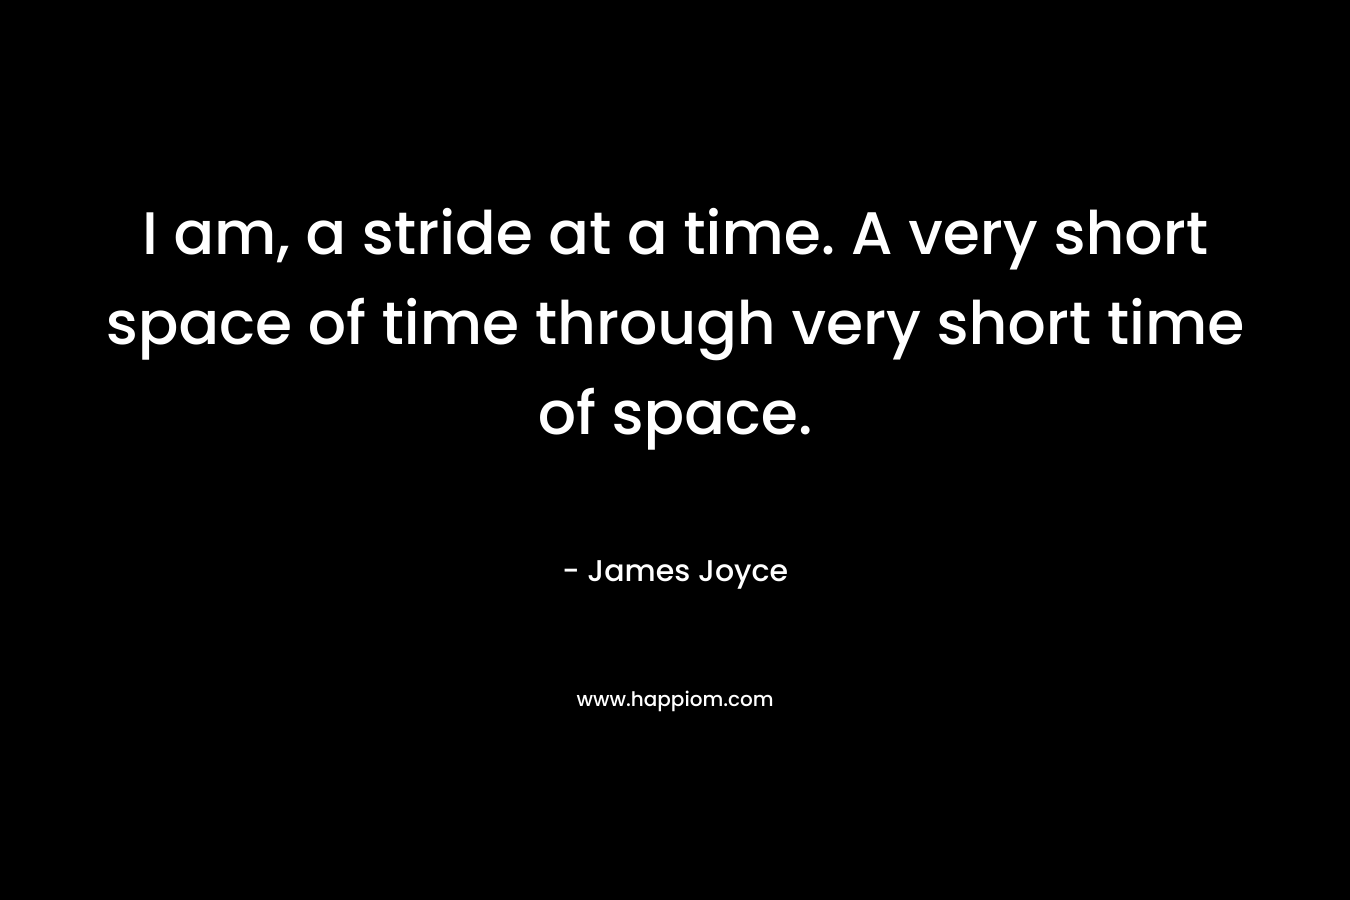 I am, a stride at a time. A very short space of time through very short time of space. – James Joyce